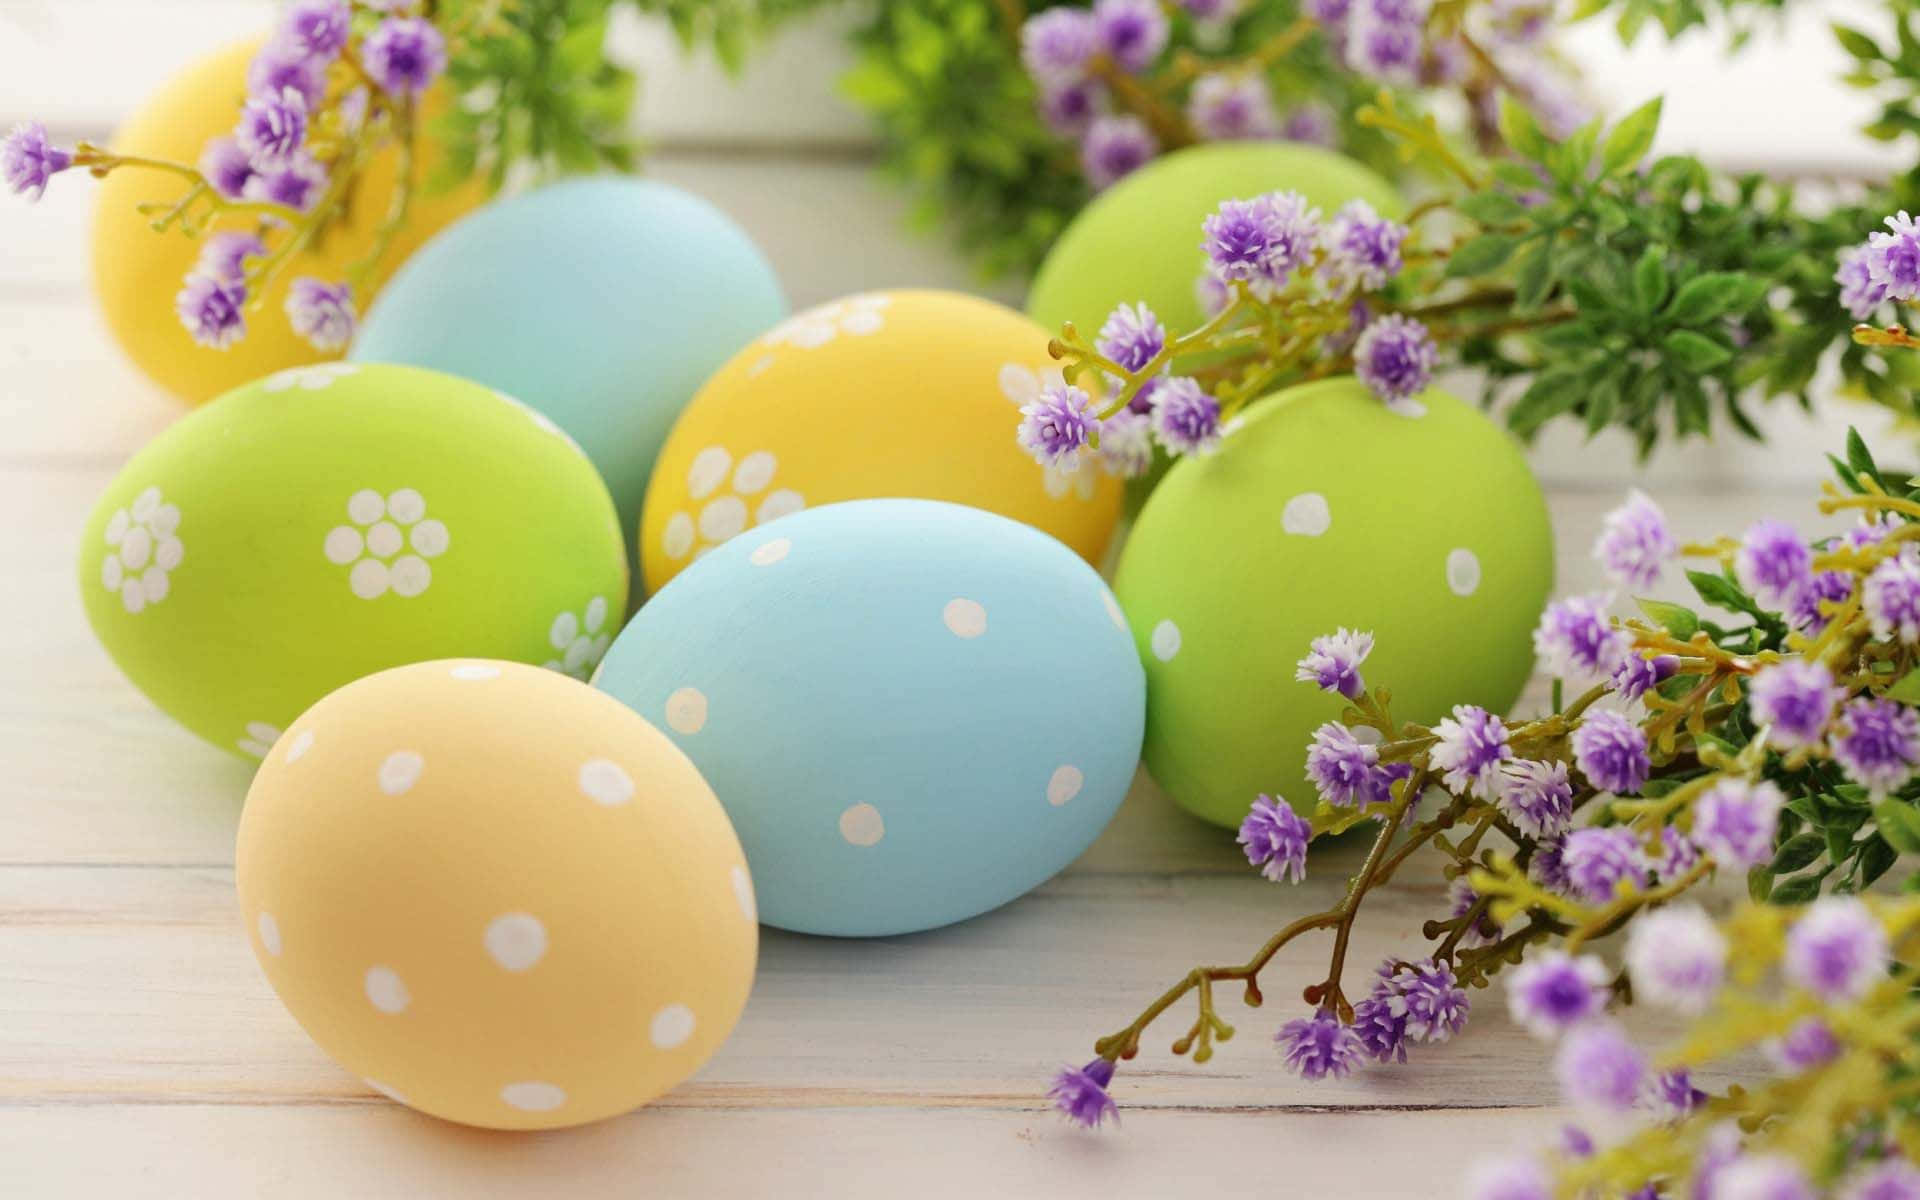 Wishing you a cute and happy Easter! Wallpaper